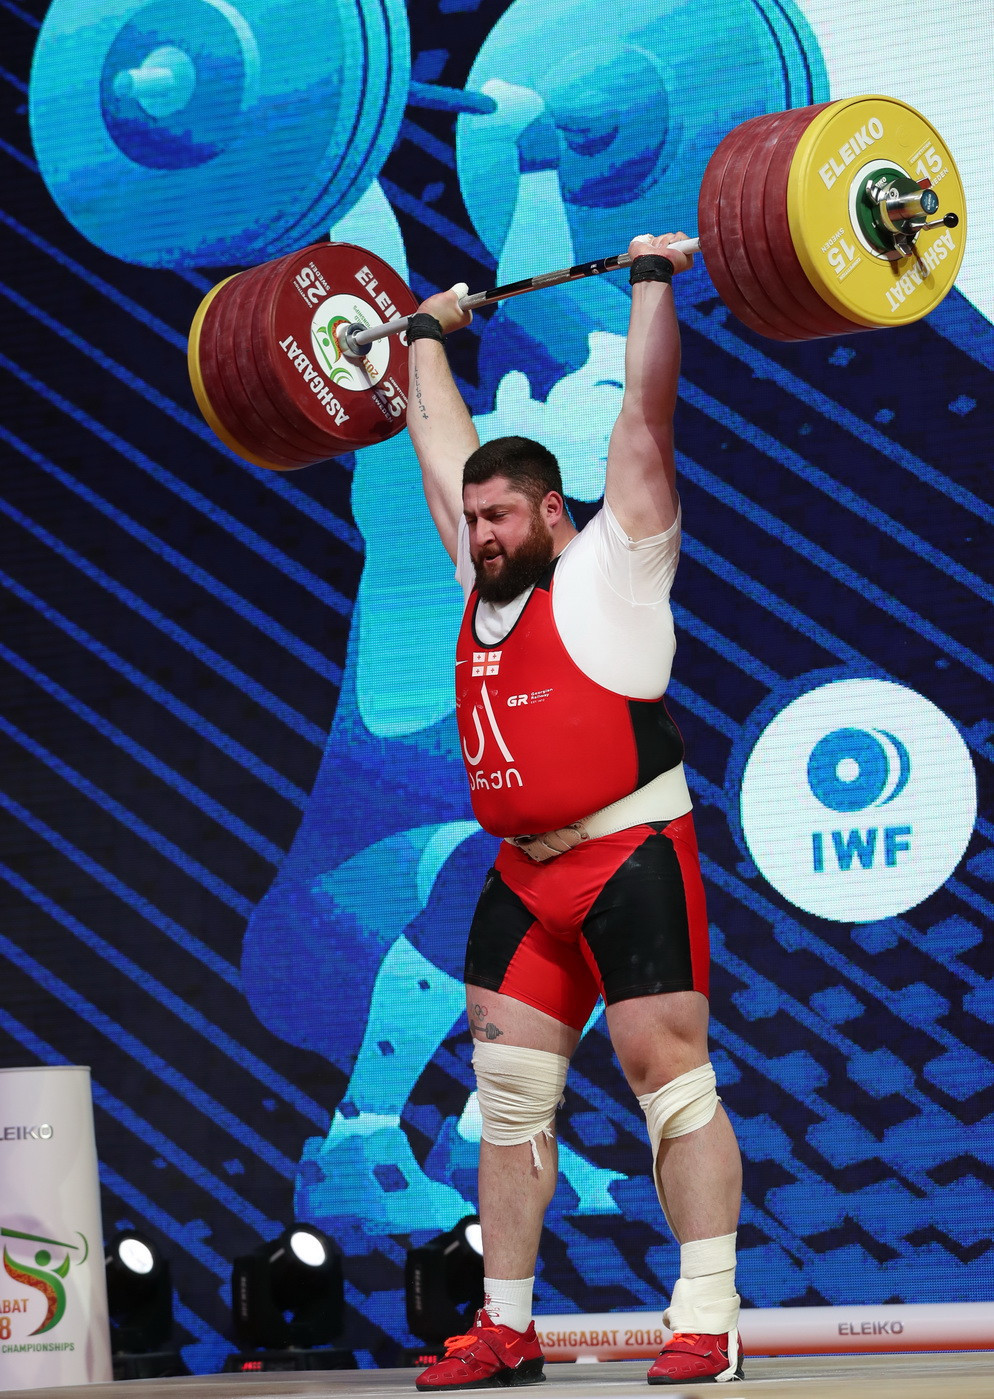 Reigning Olympic champion Lasha Talakhadze of Georgia dominated the men's over-109kg event from start to finish ©IWF